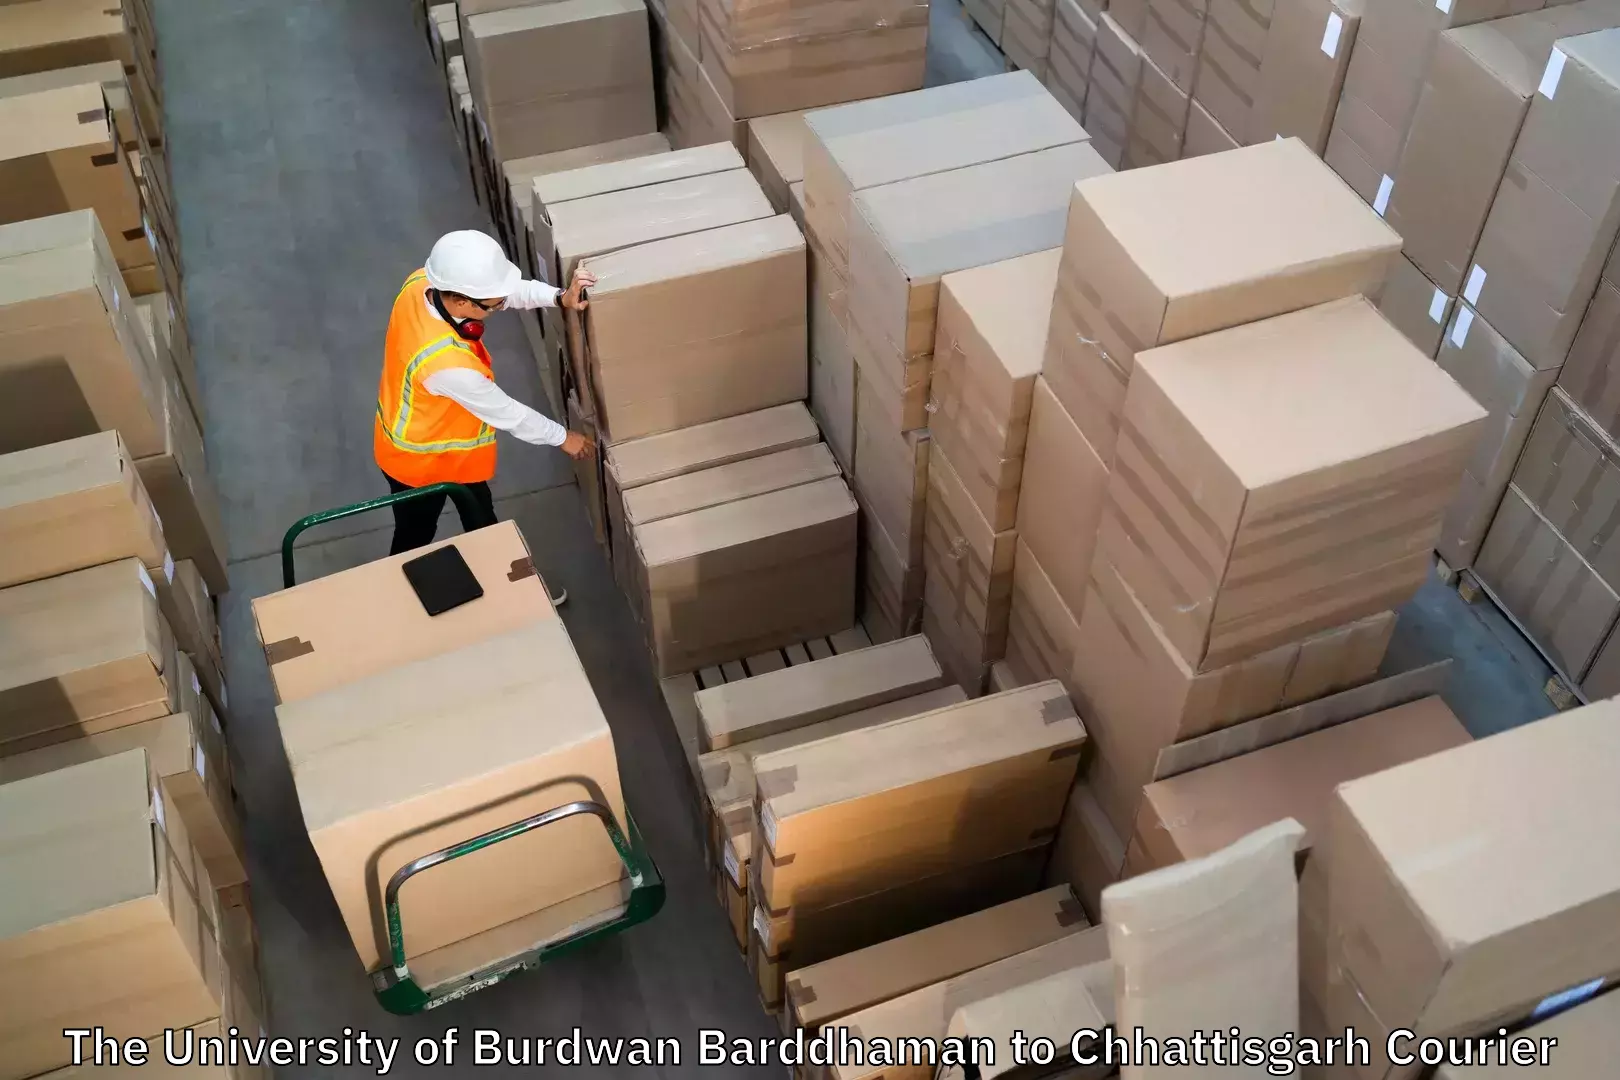 Reliable baggage delivery The University of Burdwan Barddhaman to Ramanujganj